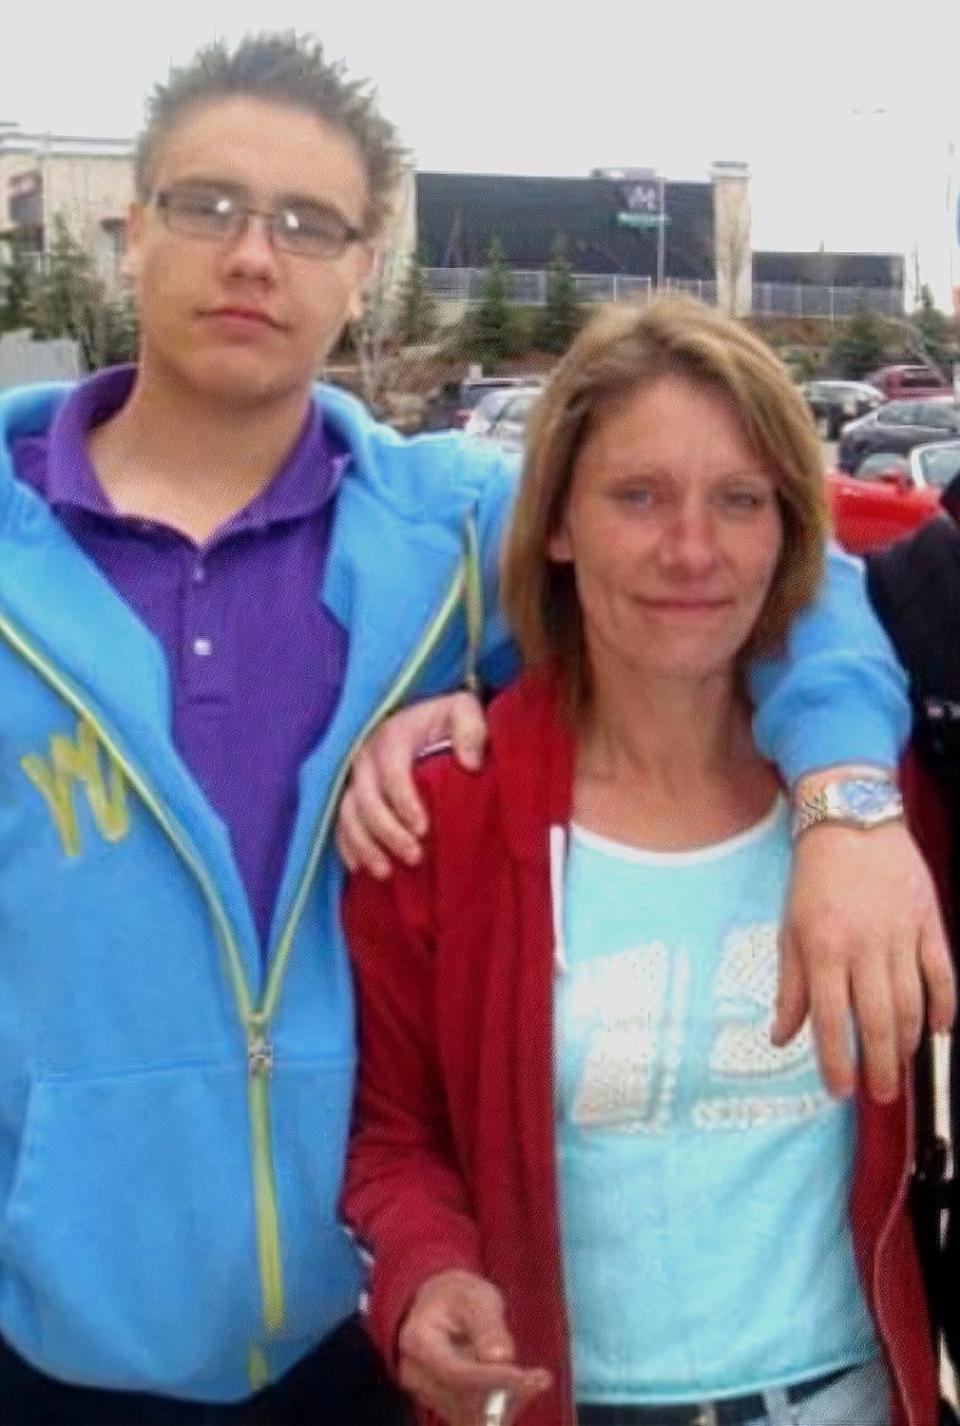 Levi Romeo Mitchell, left, with his mother, Deborah Ann Mitchell, right. He fatally shot her on Oct. 30, 2021. (Deborah Mitchell/Facebook - image credit)